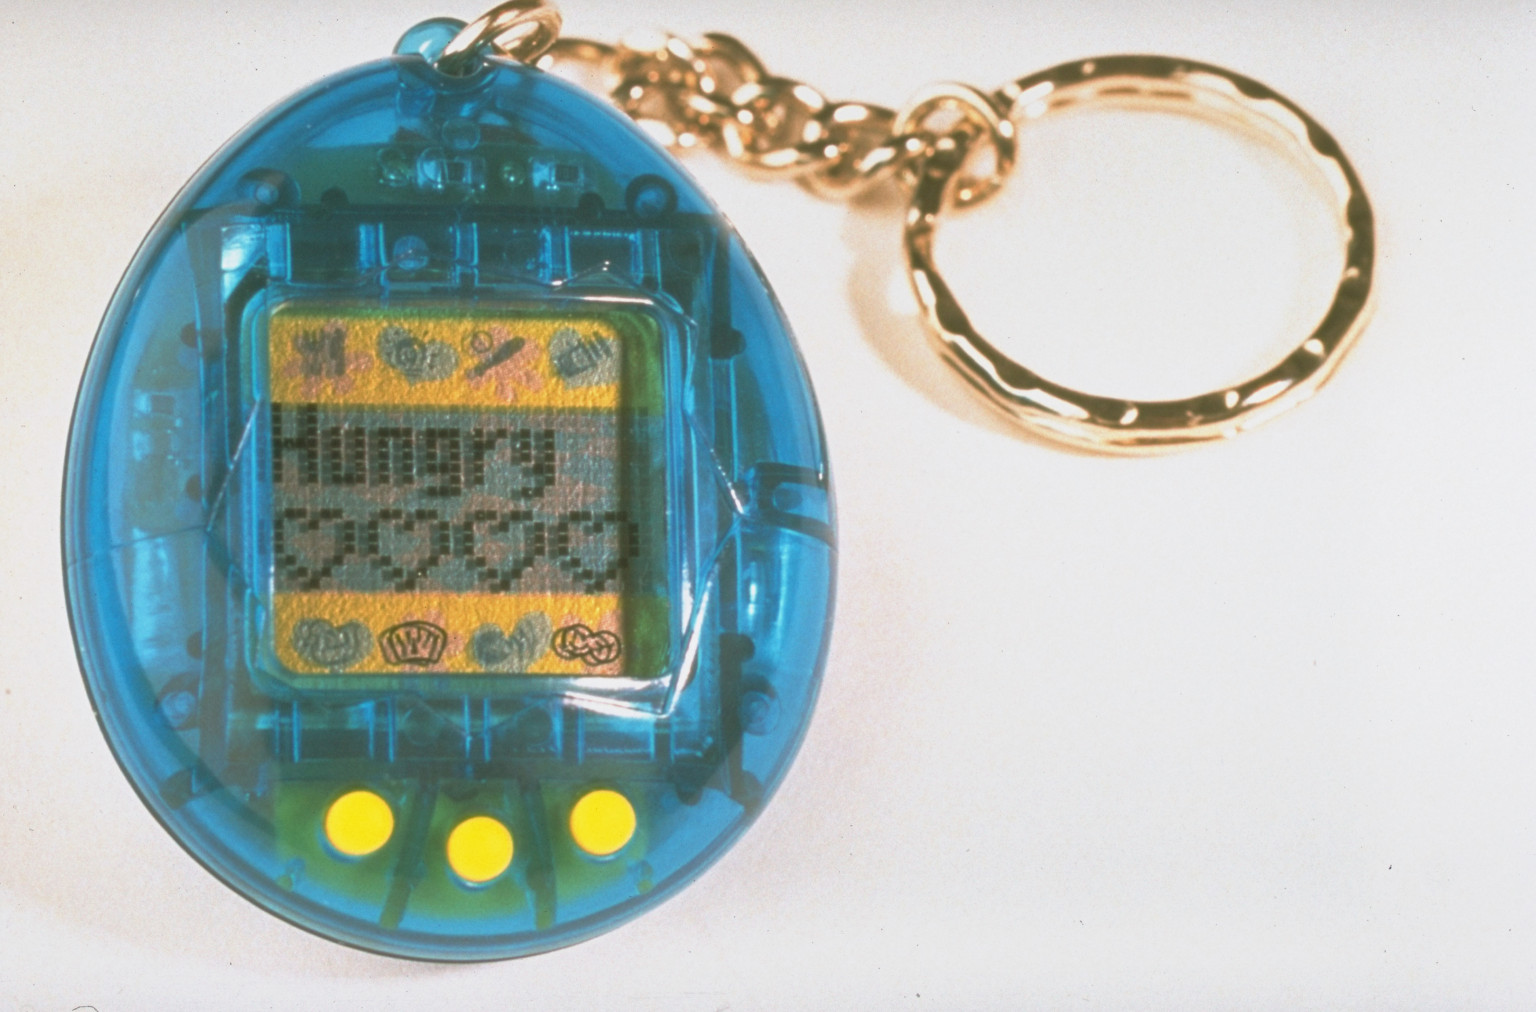 Tamagotchi Clothing Line Is Officially Happening, Kids Of The '90s1536 x 1012